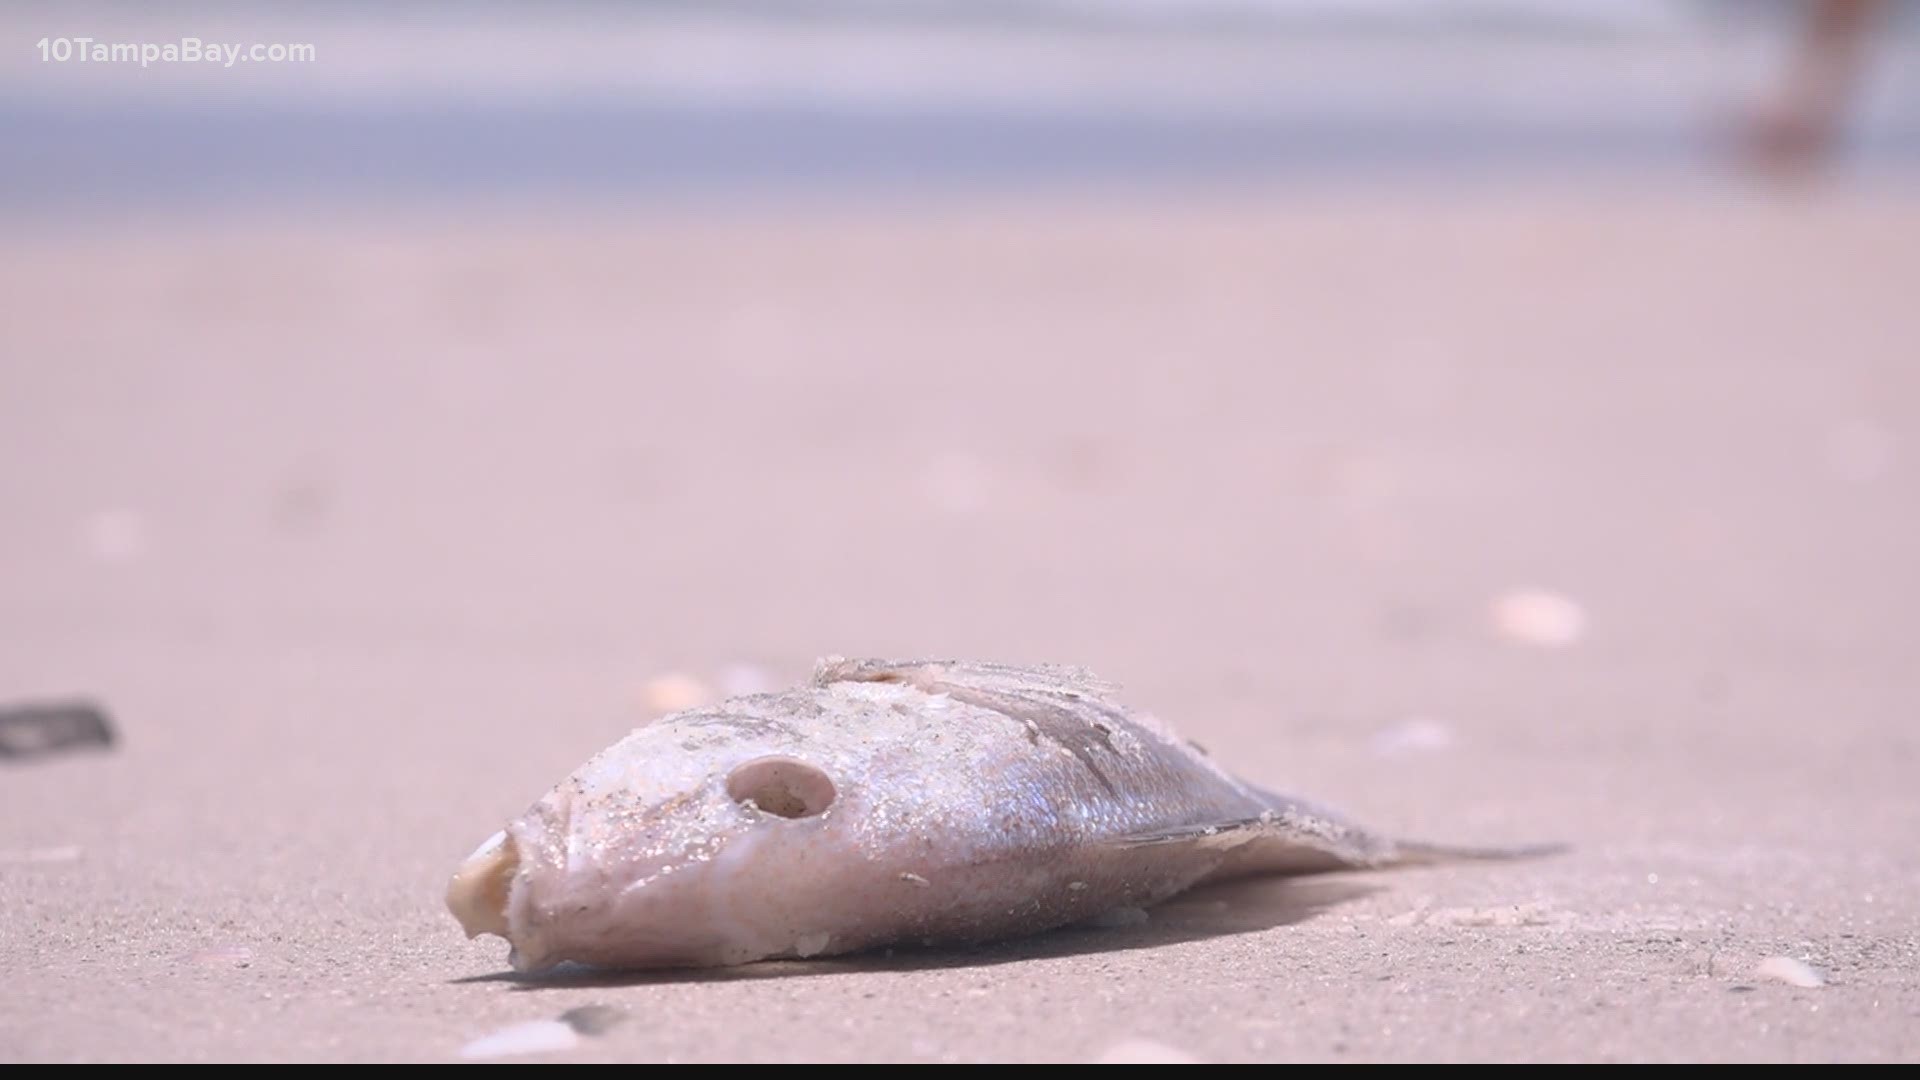 Medium to low levels of red tide were also detected in Hillsborough and Manatee County.